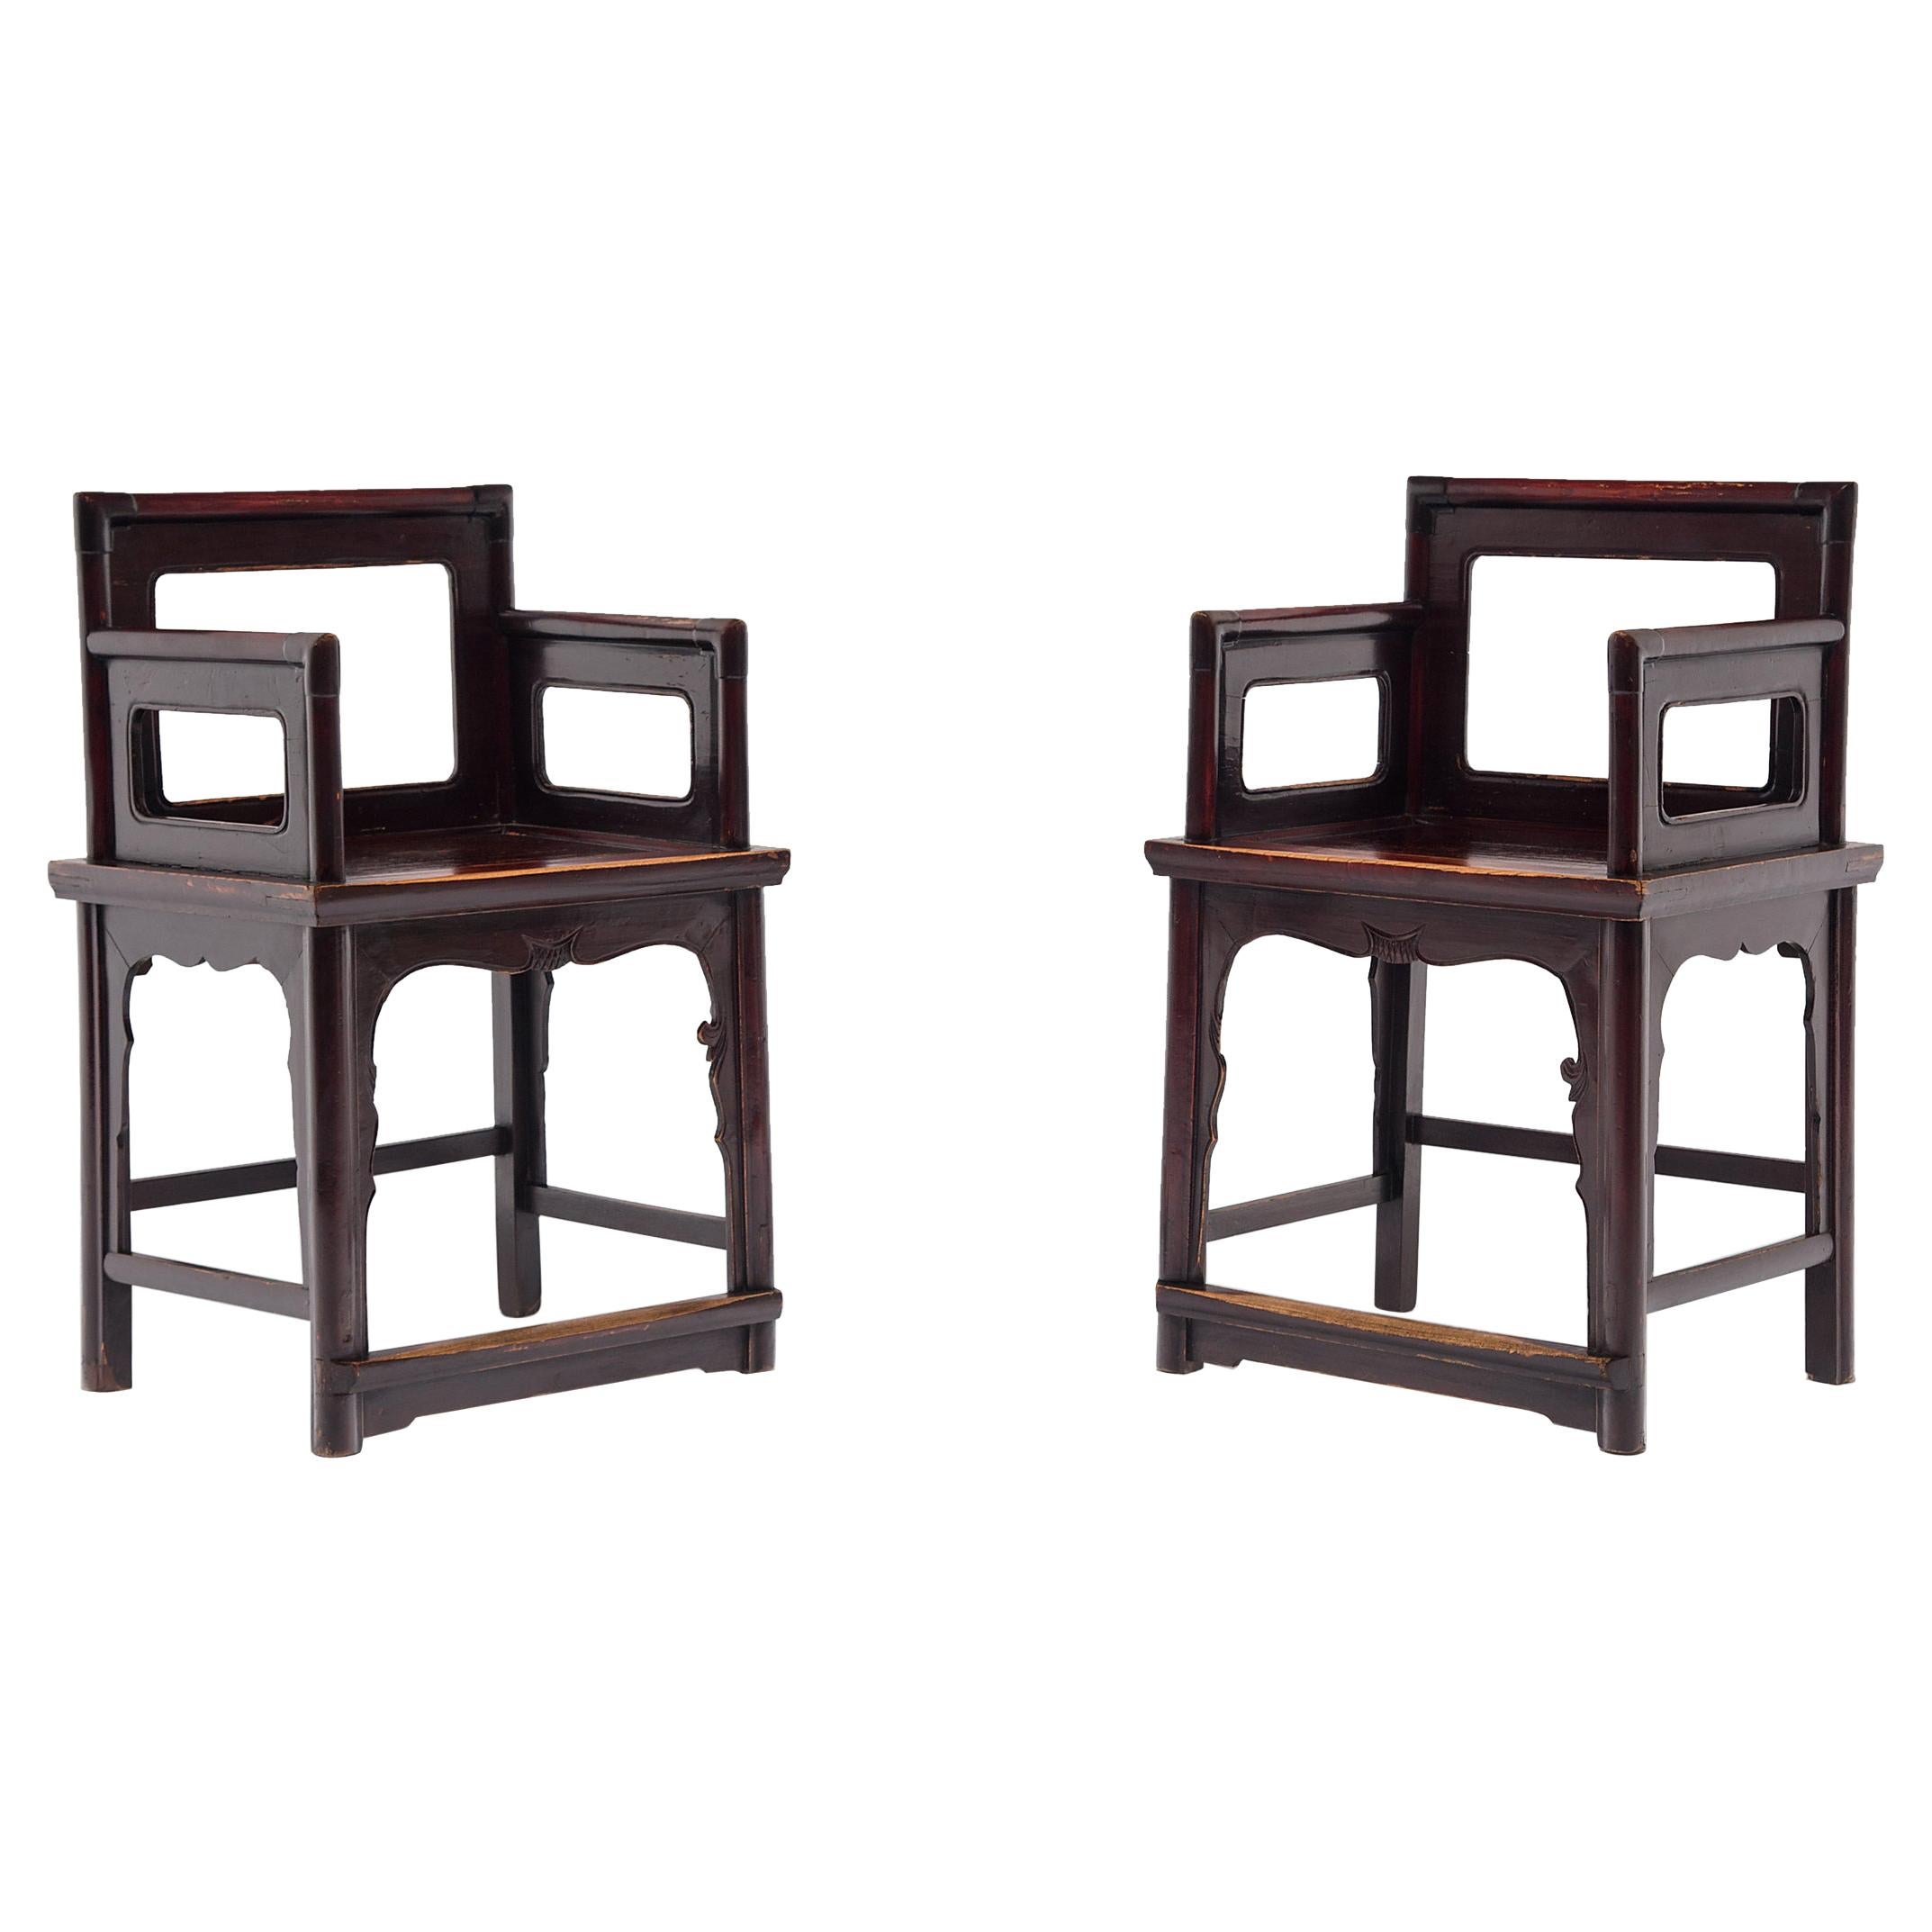 Pair of Chinese Rose Chairs, c. 1850 For Sale